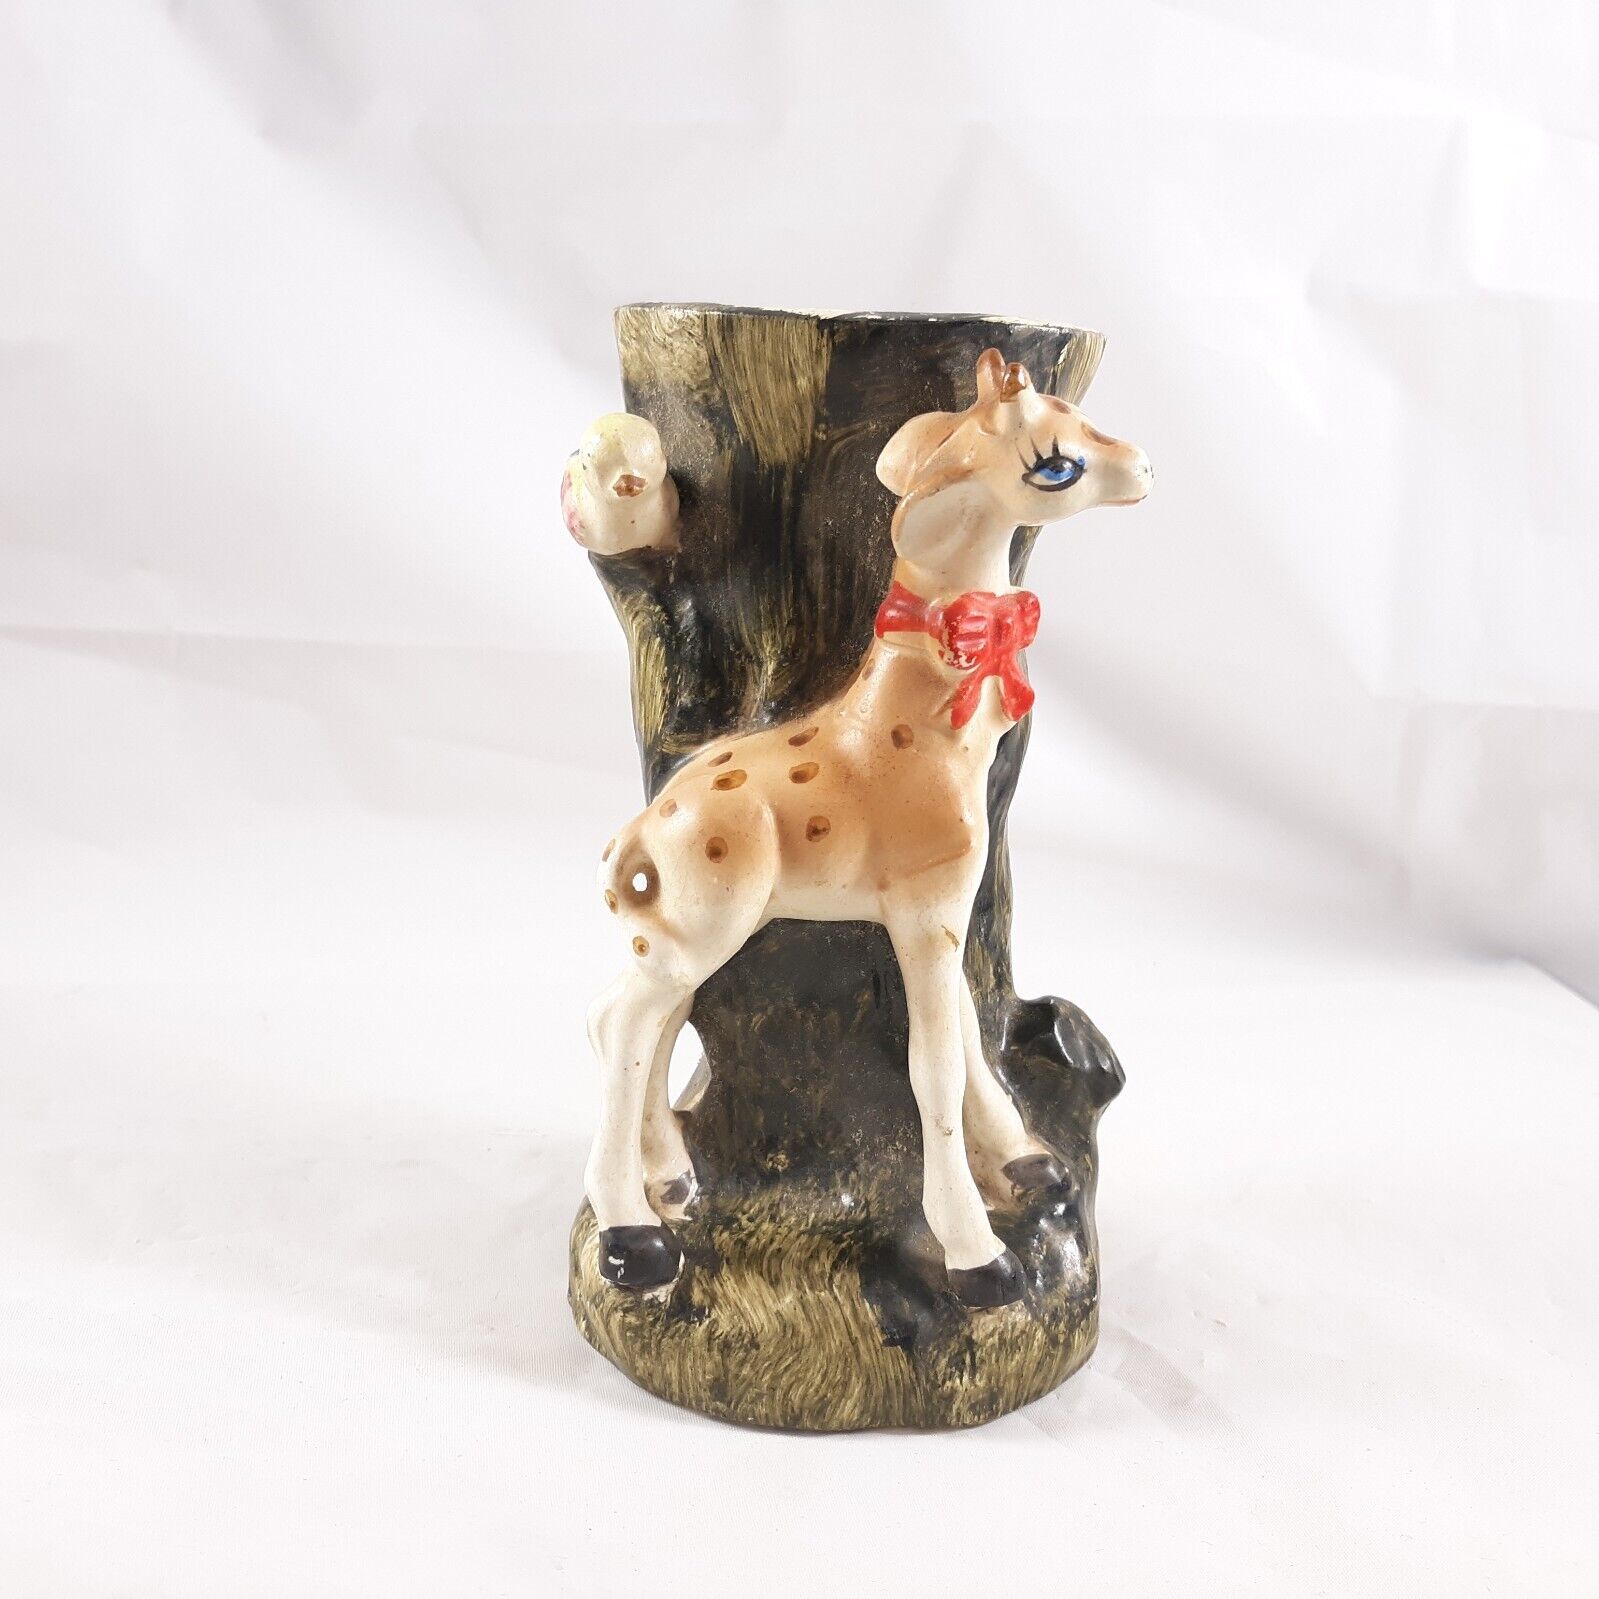 Primary image for Vintage Giraffe With Bow Figural Vase Kitschy Ceramic Hand Painted